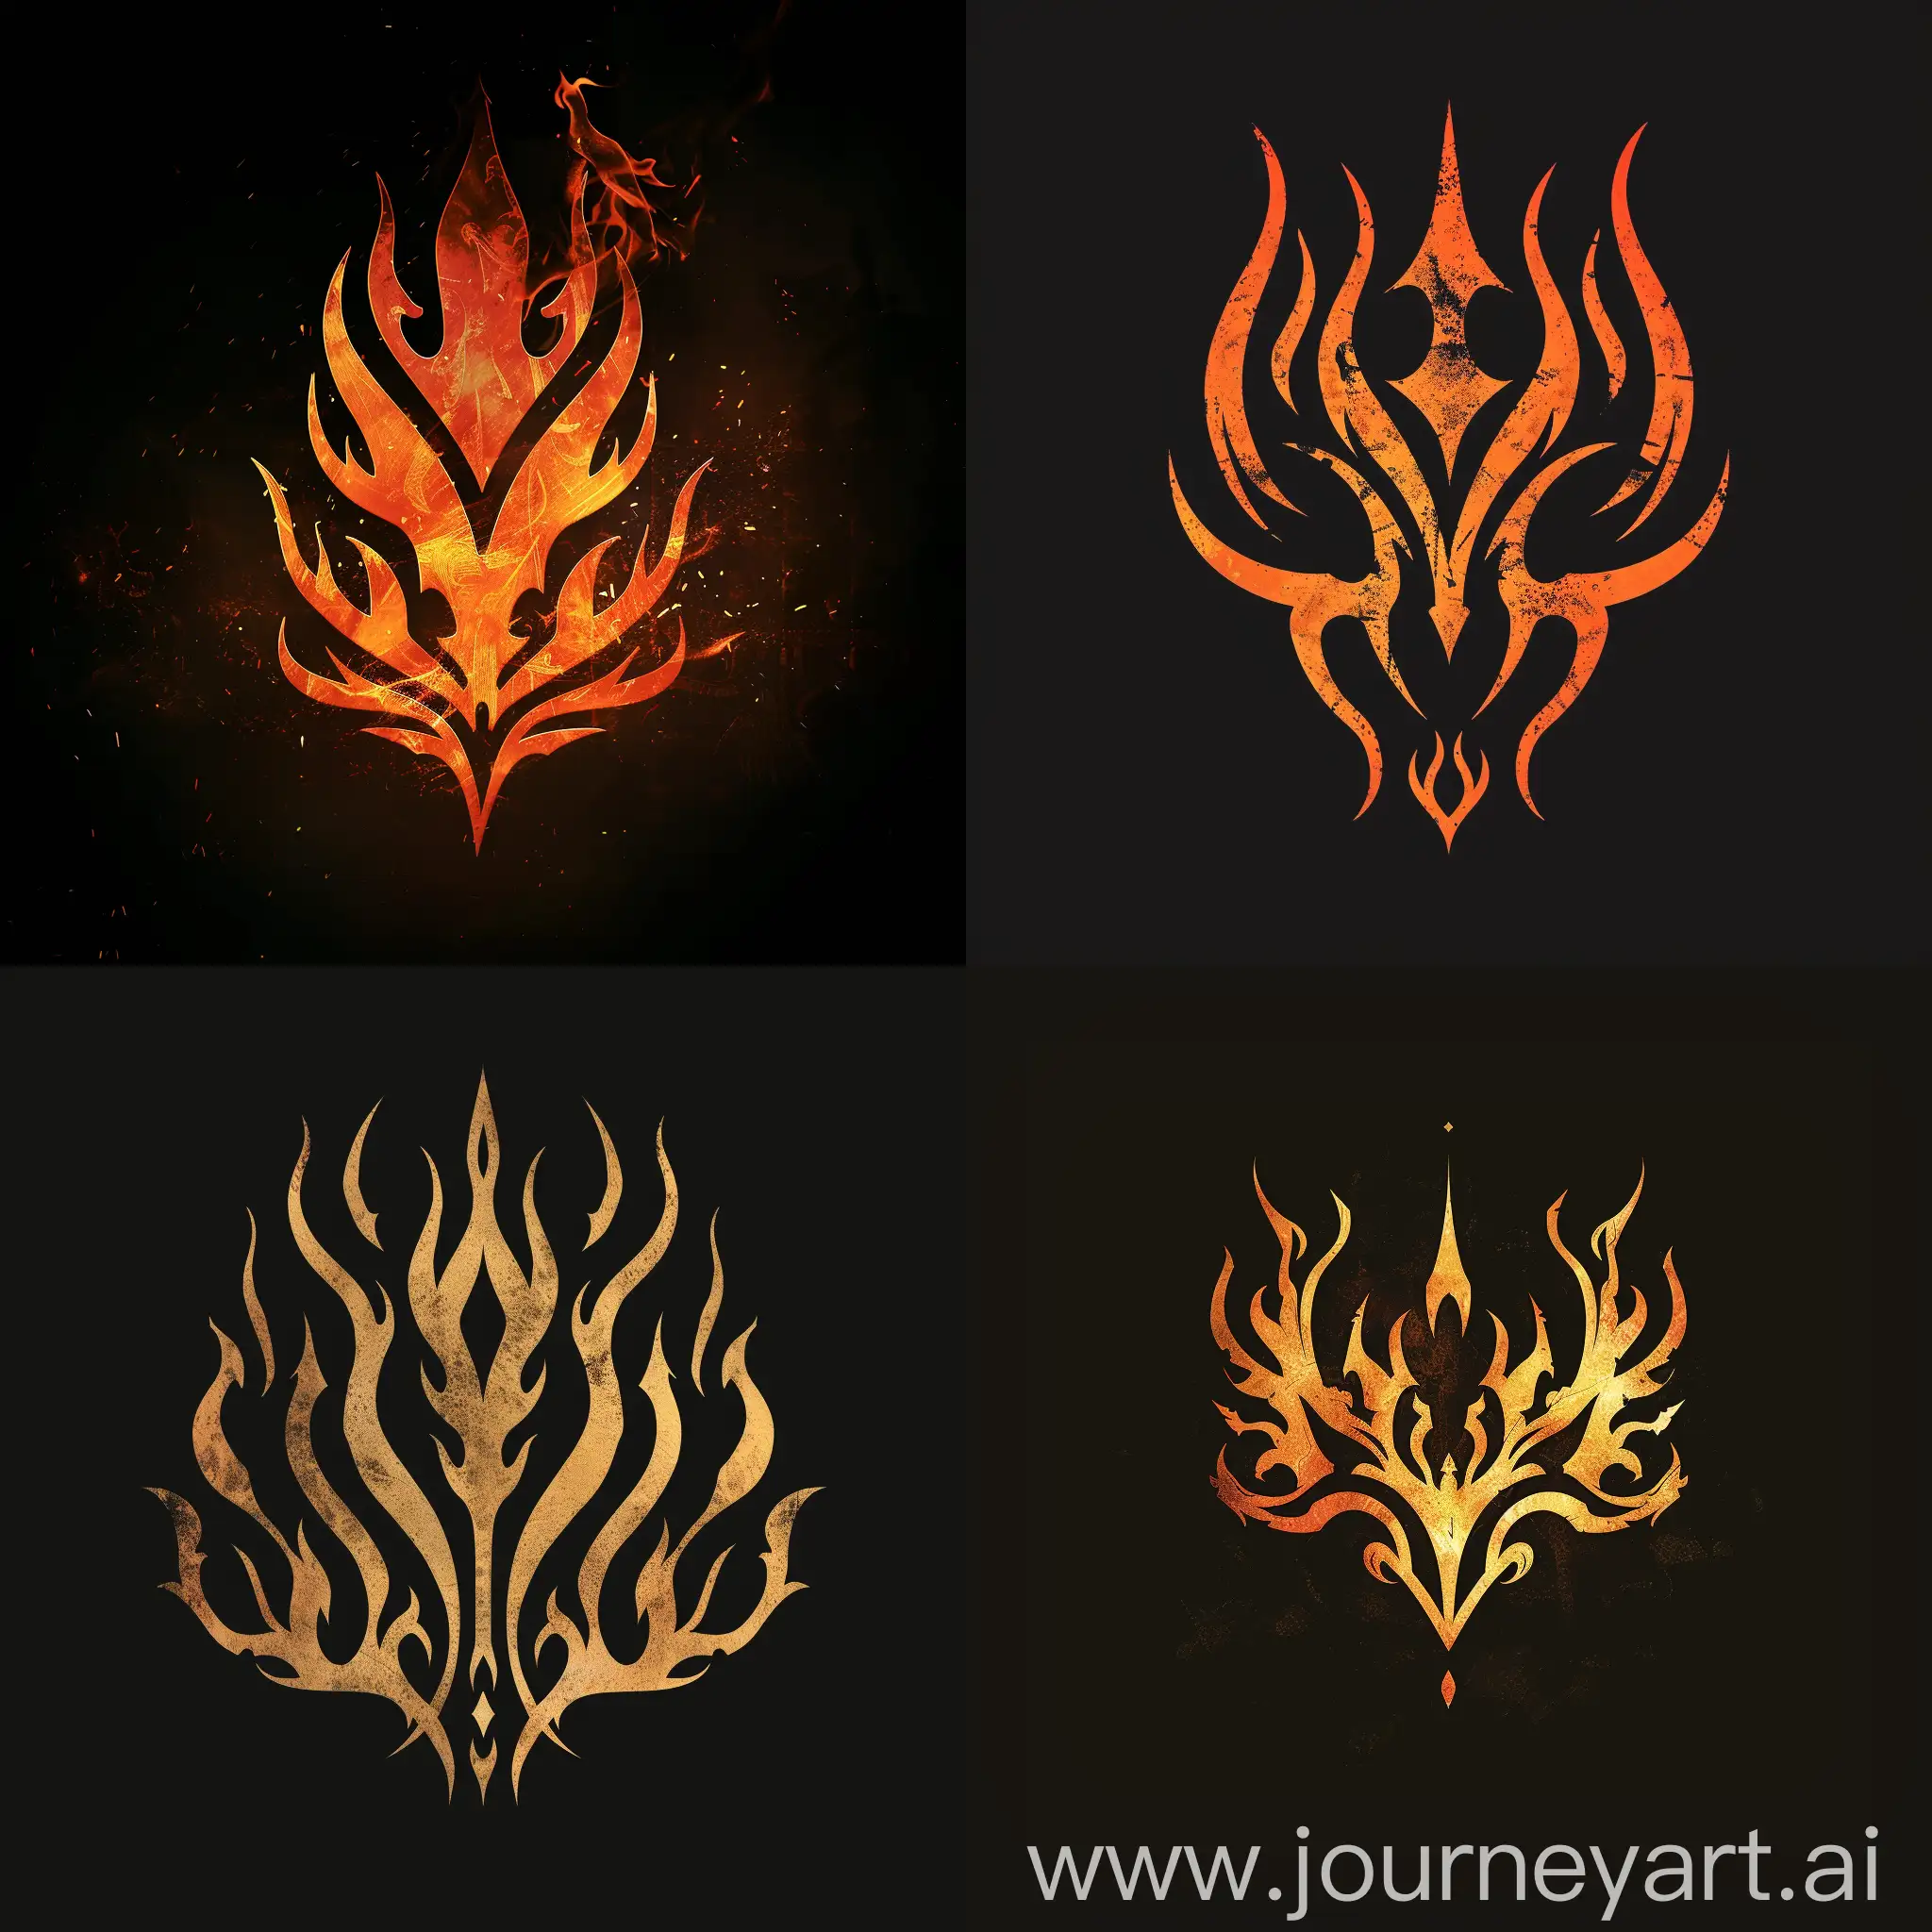 Logo for alliance called Temple of Doom featuring flames.